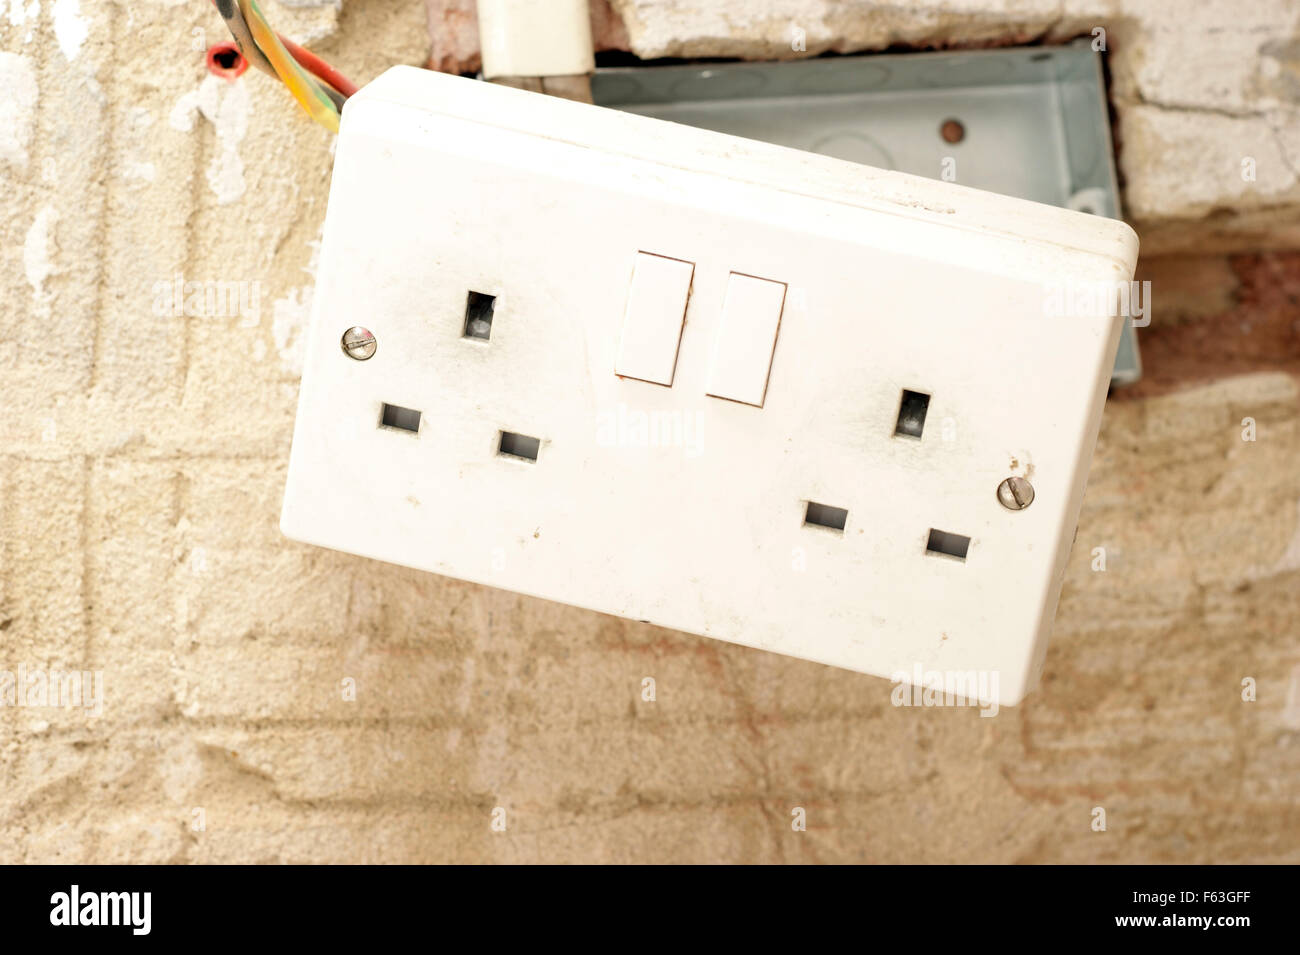 Electric plug sockets with exposed wiring in a rented social housing property house that needs attending to Stock Photo